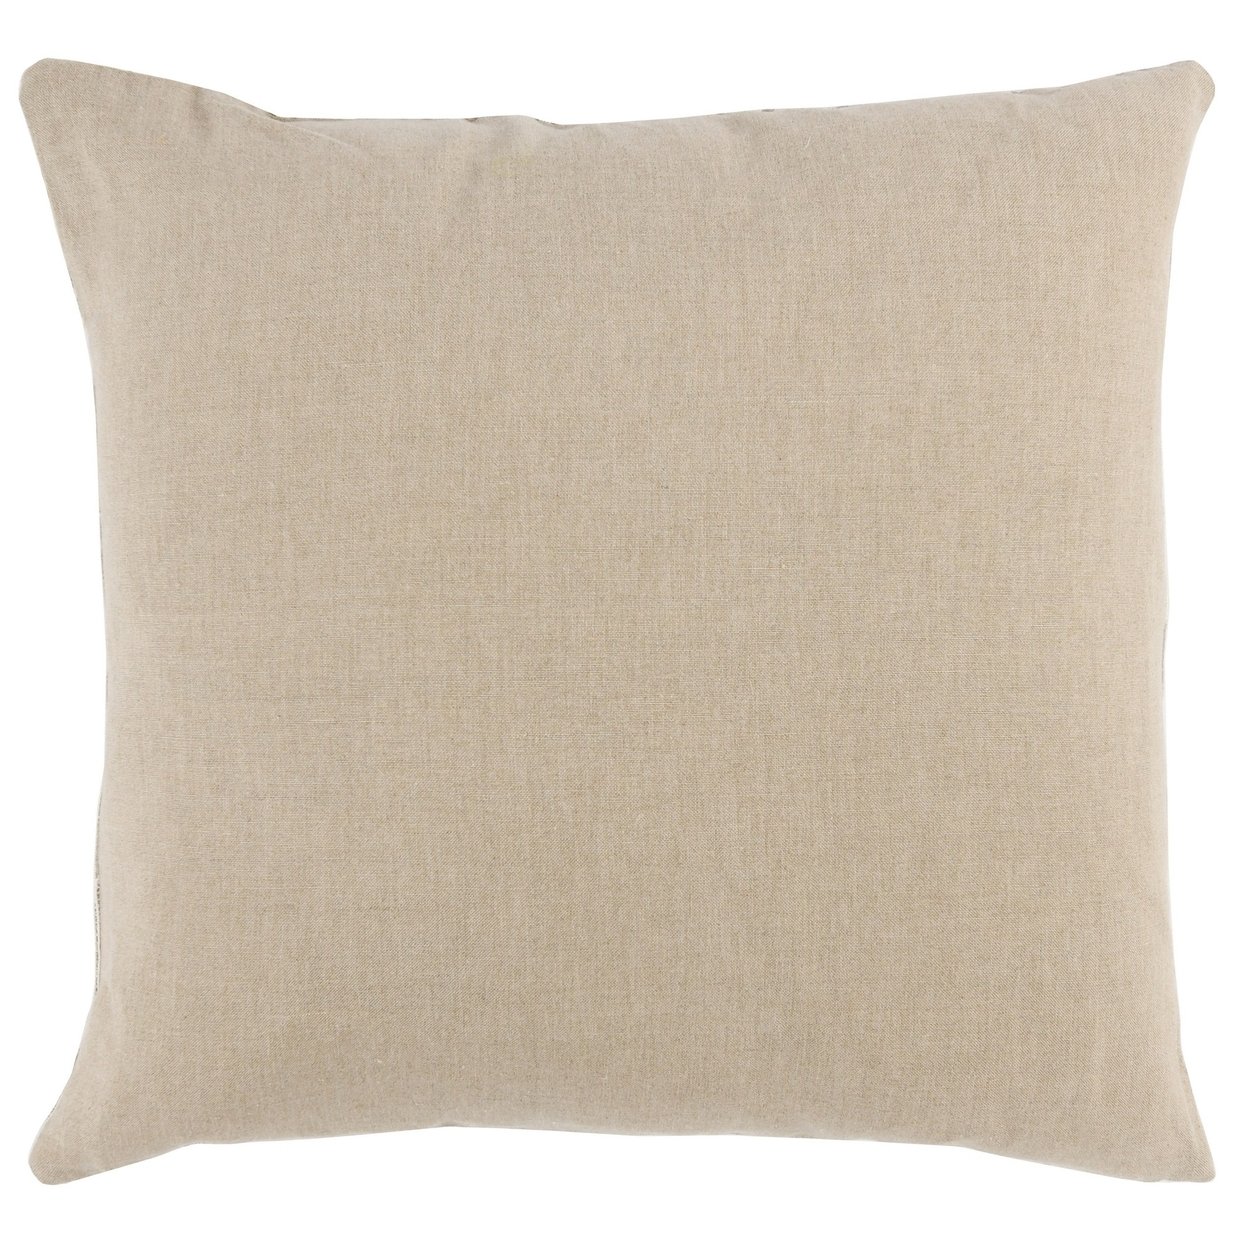 22 Inch Square Accent Throw Pillow, Hand Embroidered Linear Patterns, Ivory- Saltoro Sherpi